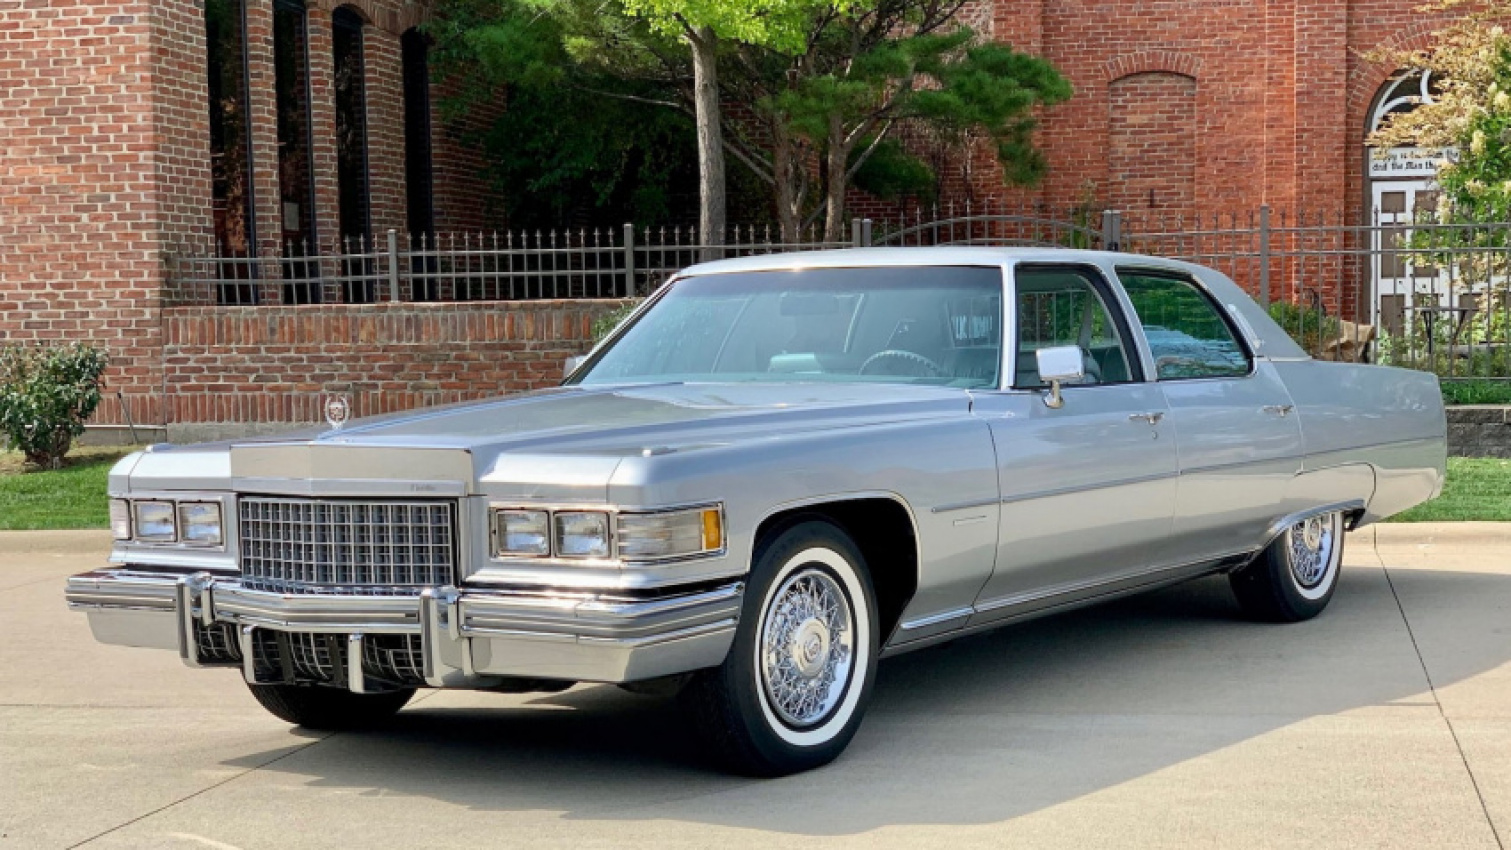 autos, cadillac, cars, classic cars, 1970s, year in review, fleetwood cadillac history 1976